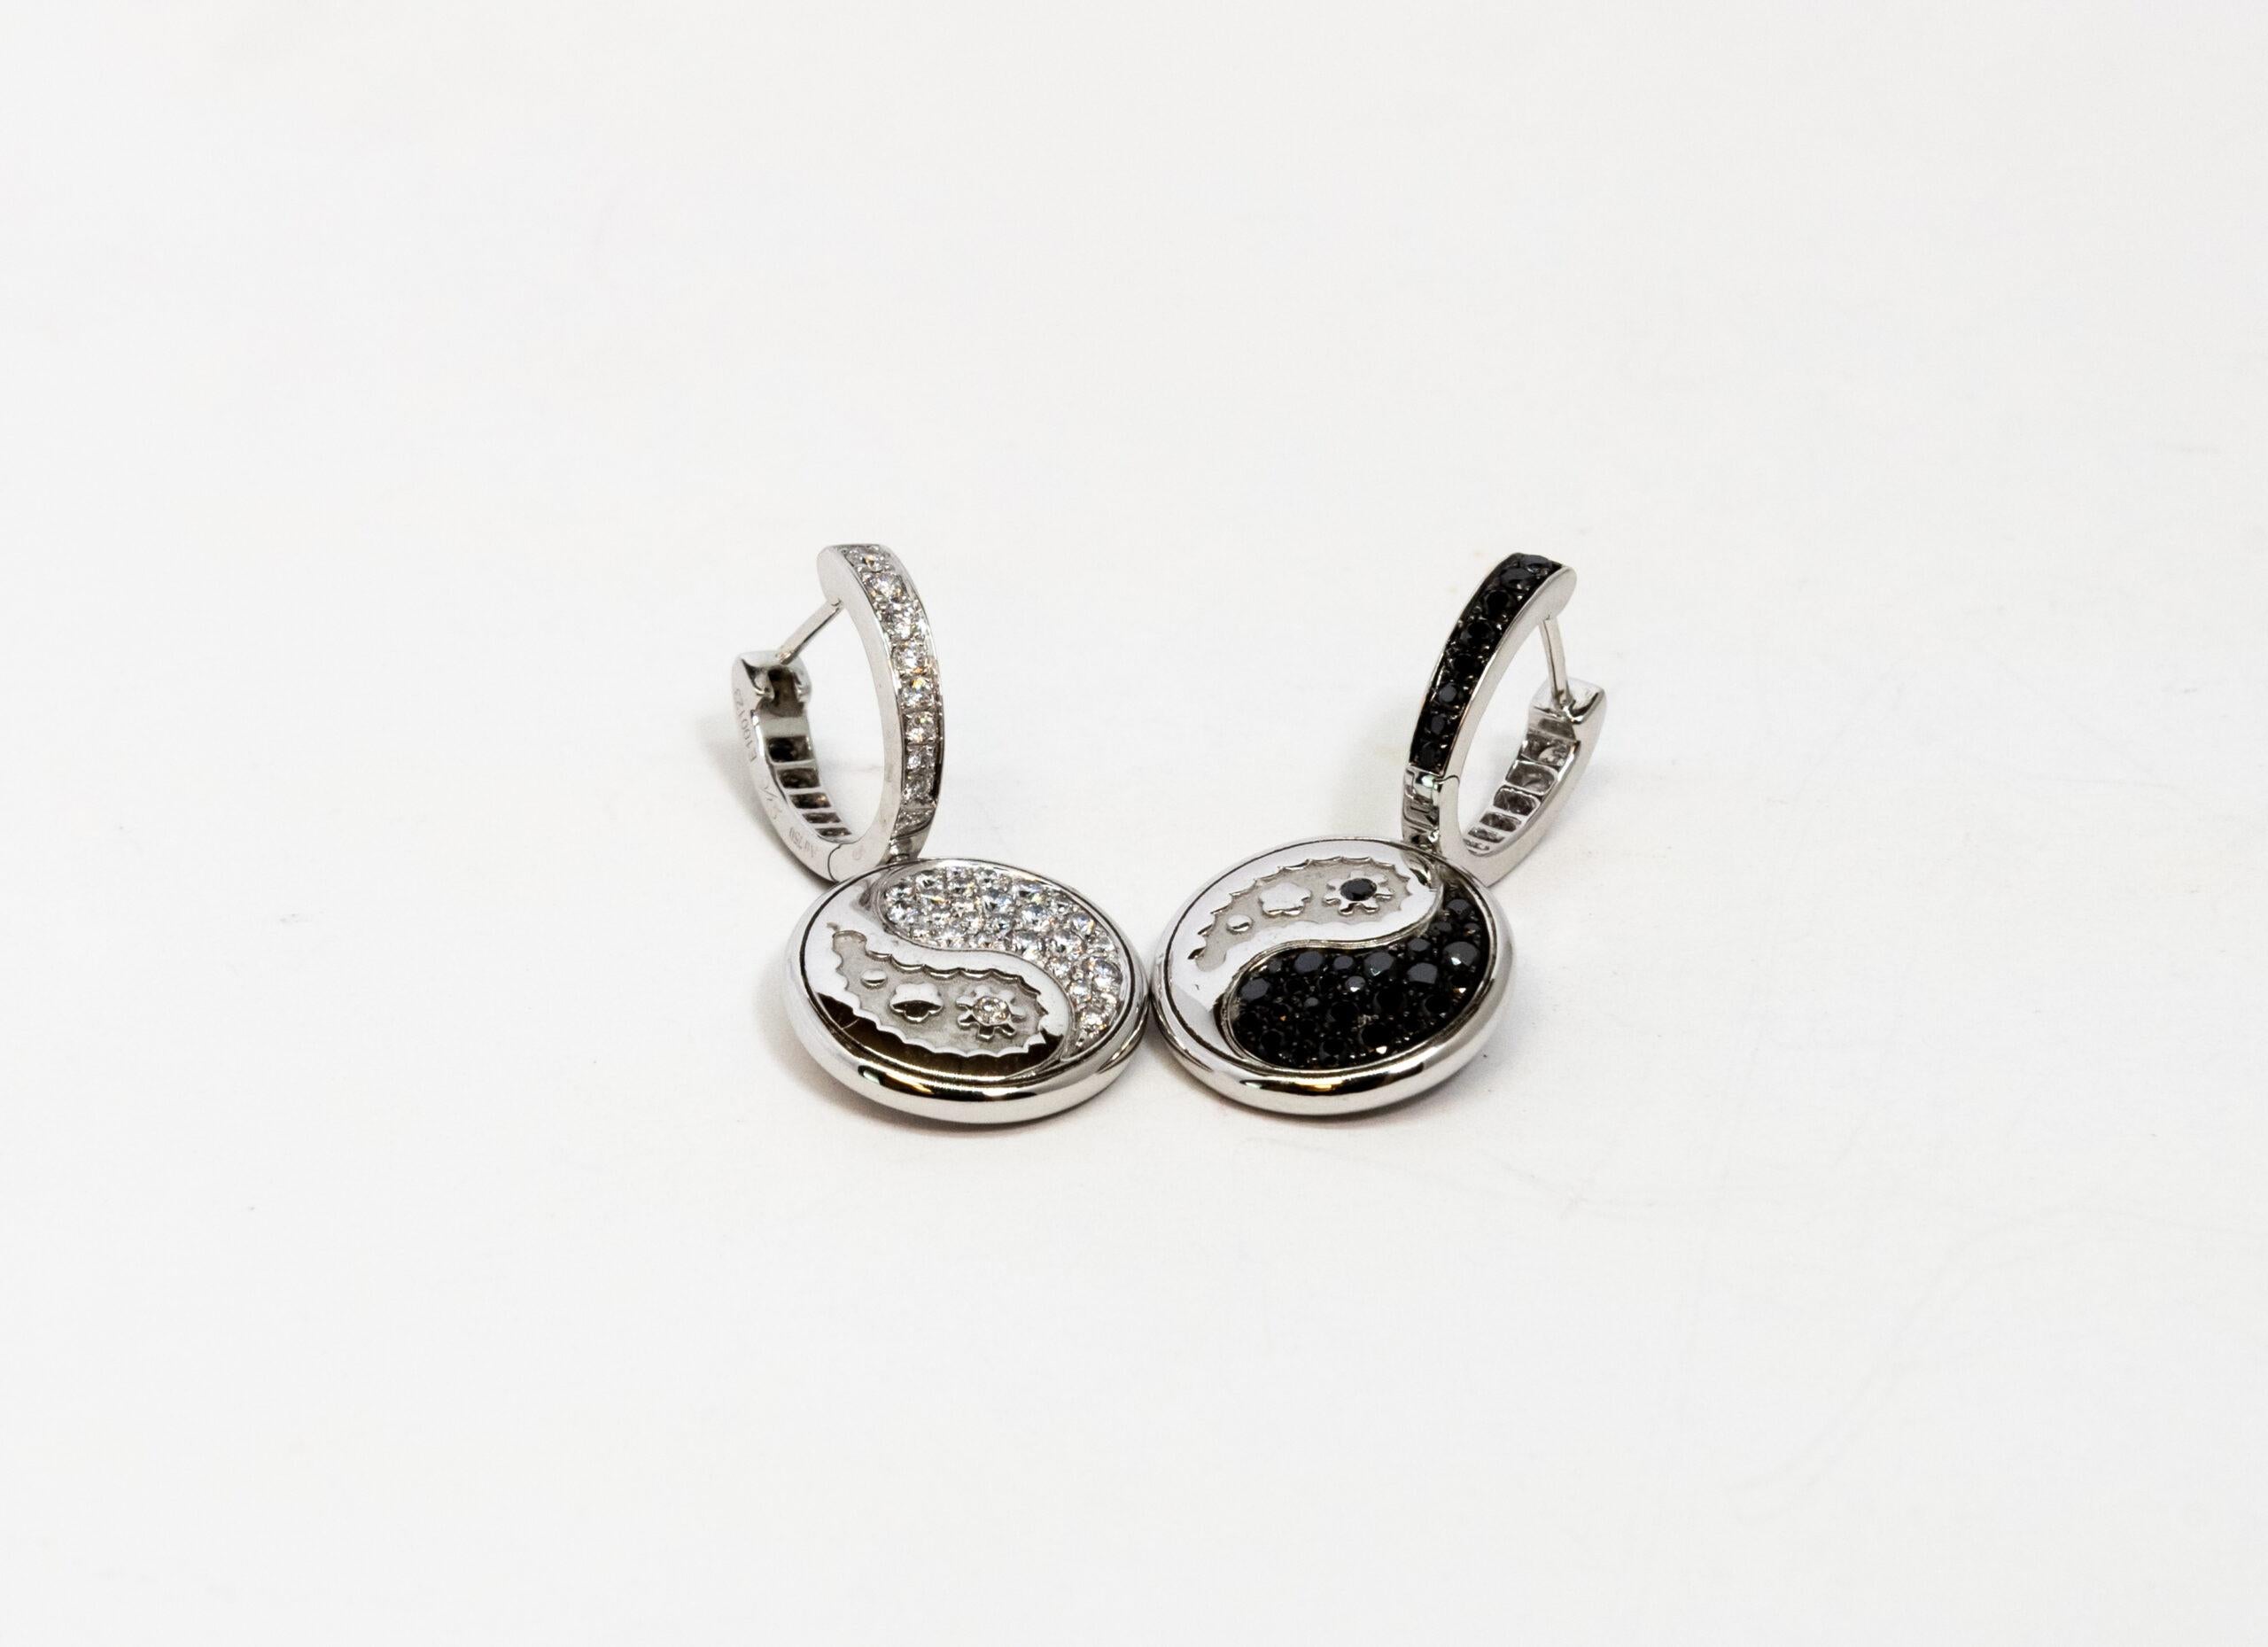 This 18K White Gold English lock earring. Decorated as Yin Yang symbols. Each piece is double sided. One side set with white diamonds and other side set with black diamonds. Diamonds totaling ~0.59ct. Latch back.

Dimensions: 1.1 cm x 3 cm